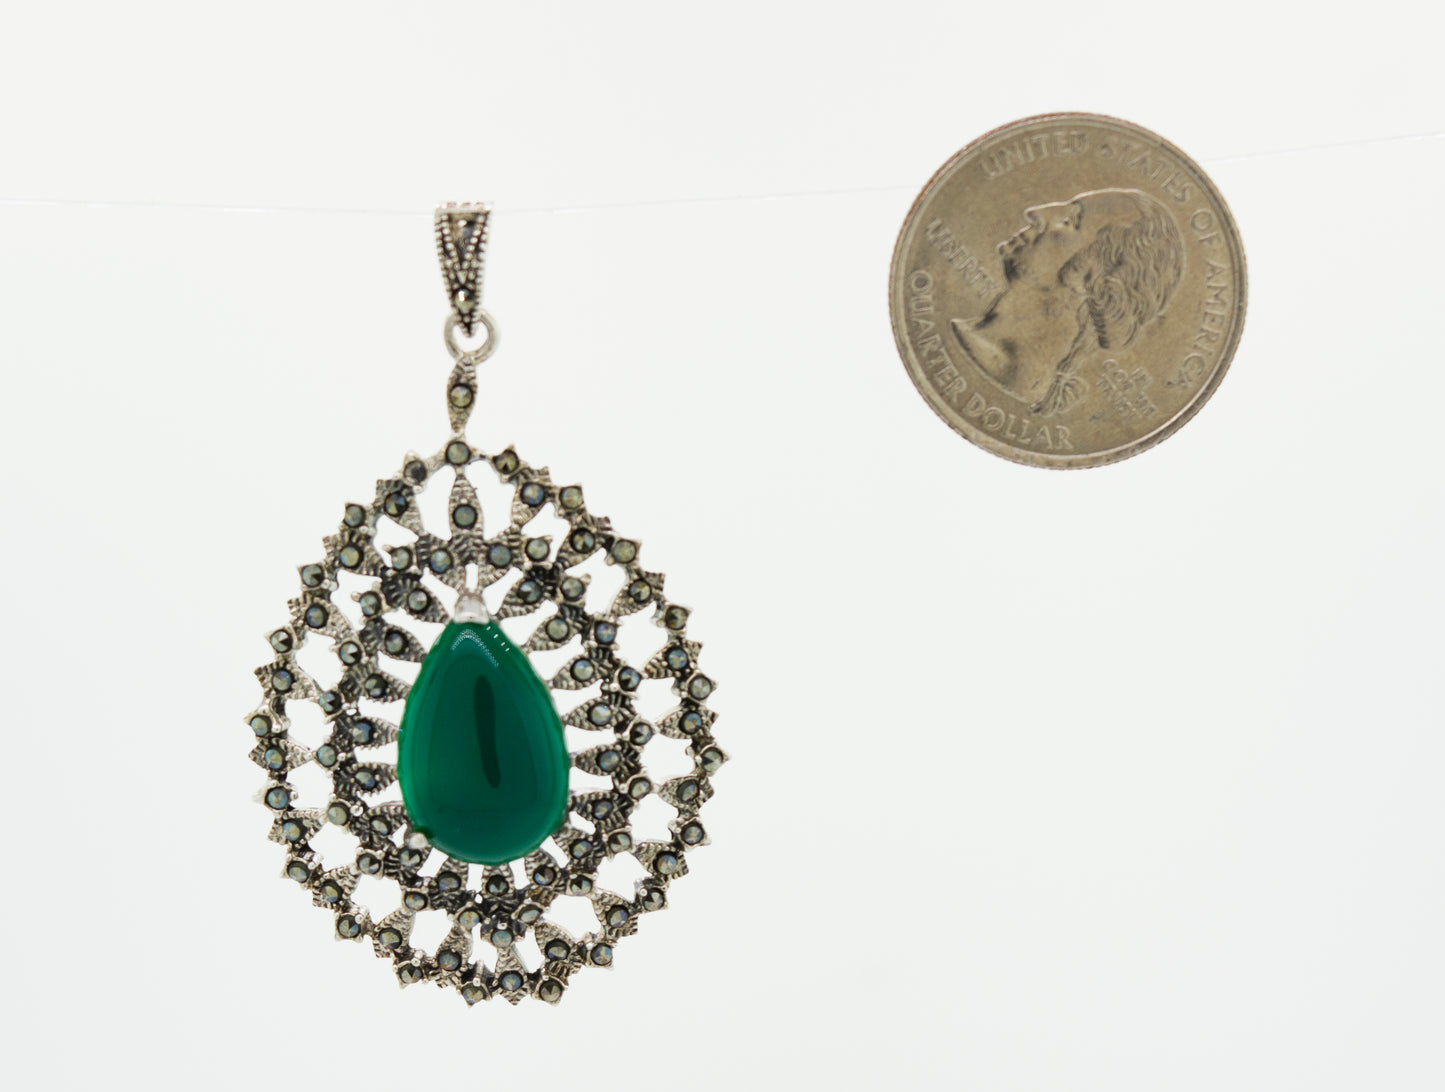 A Beautiful Aventurine Pendant with an emerald stone and a coin next to it by Super Silver.